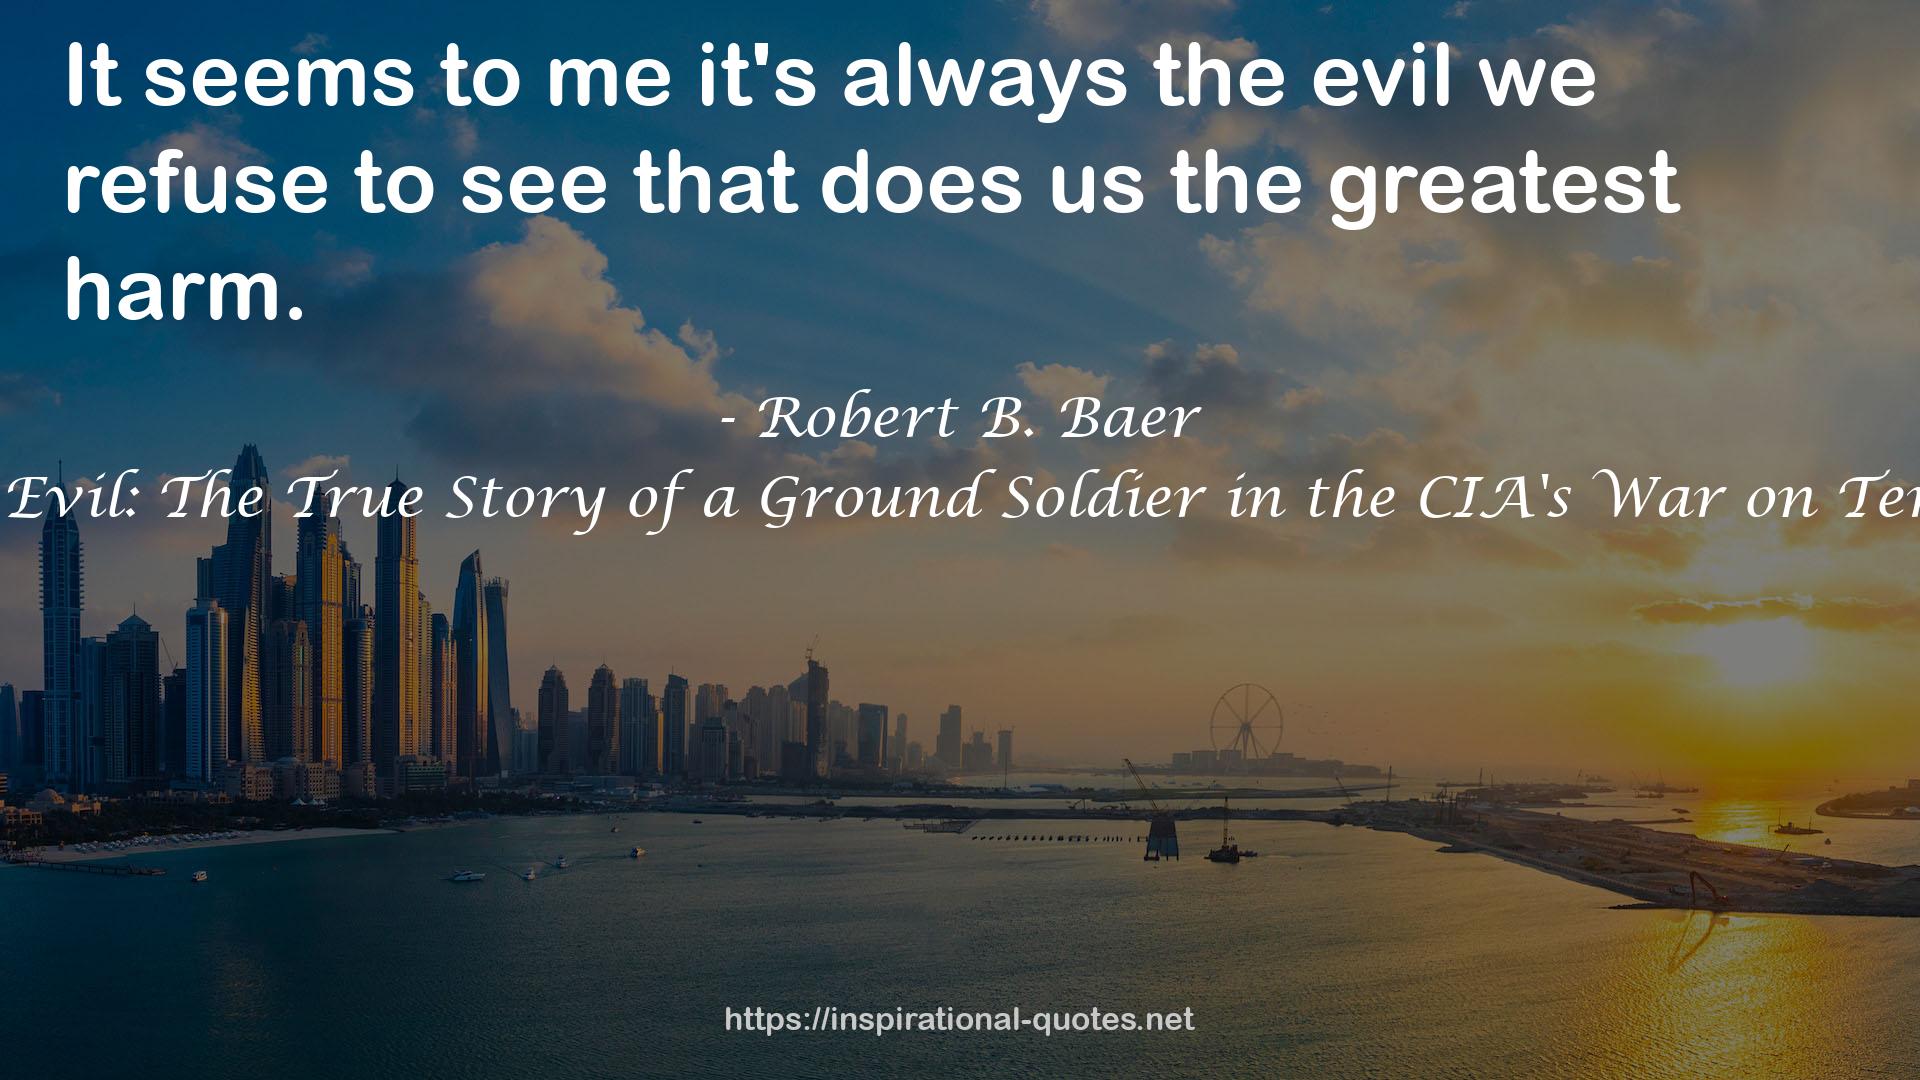 See No Evil: The True Story of a Ground Soldier in the CIA's War on Terrorism QUOTES